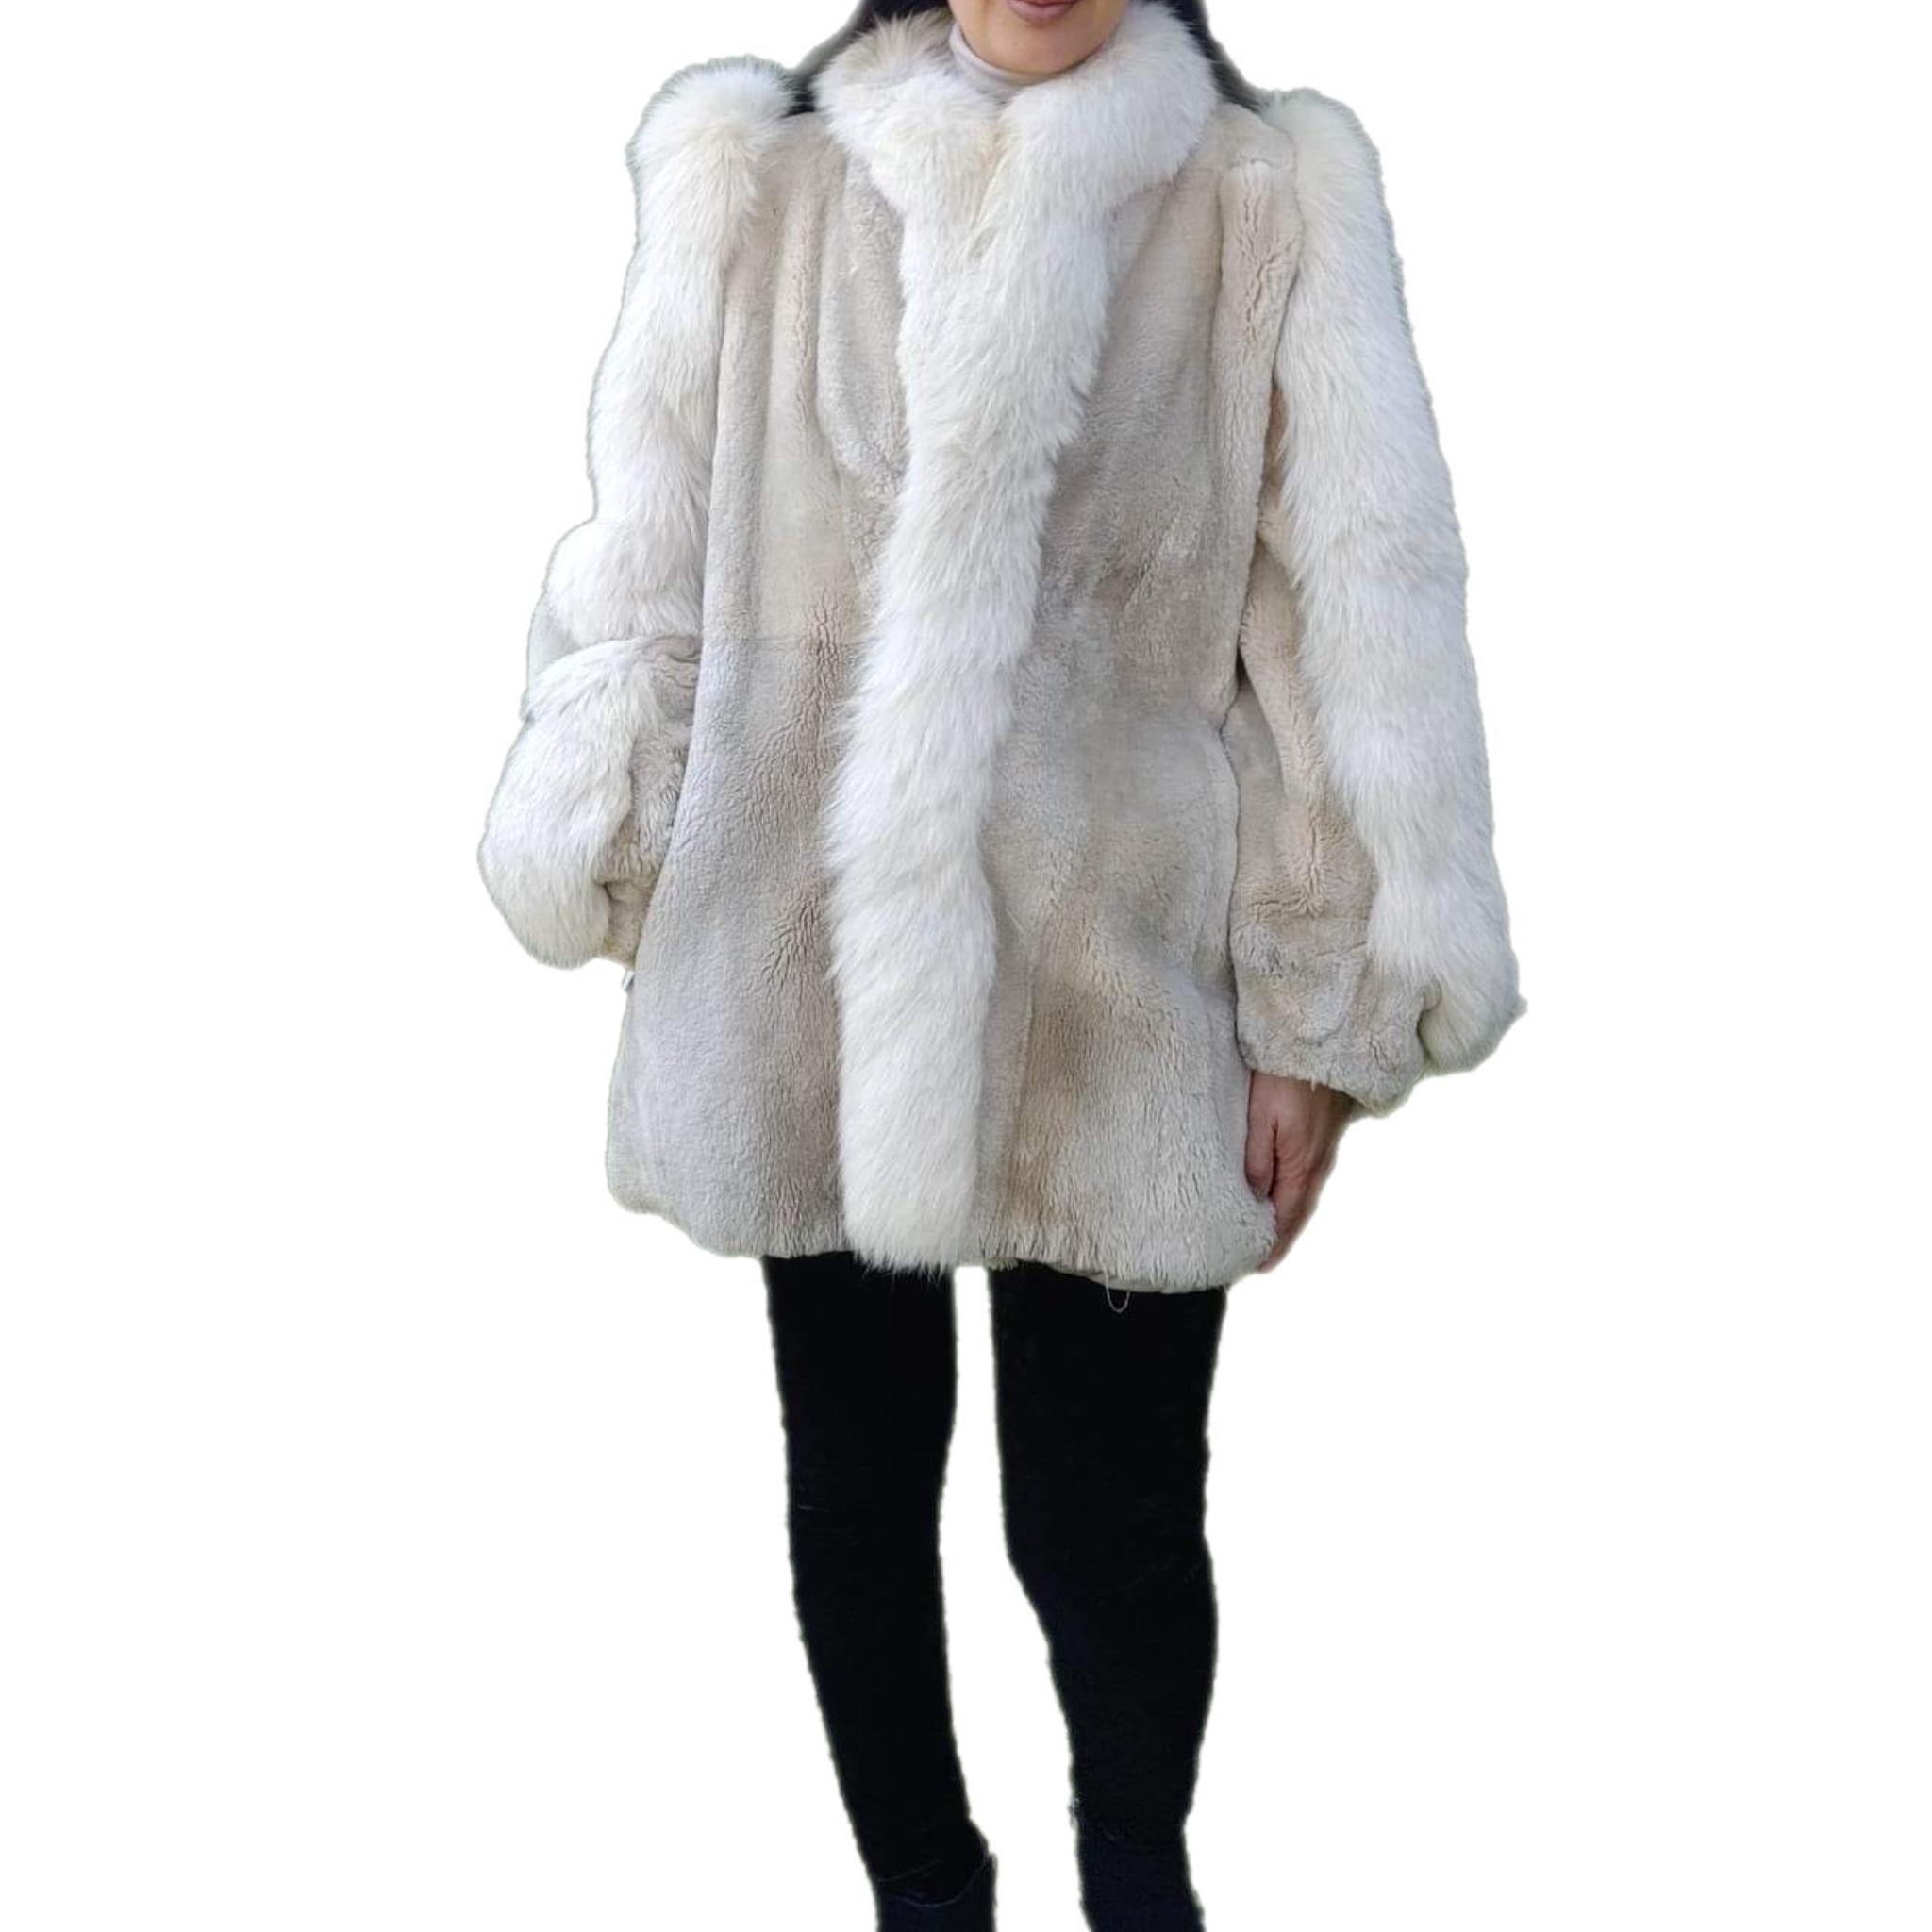 Sheared Beaver Fur Coat with Fur Trim (Size 8-M) For Sale